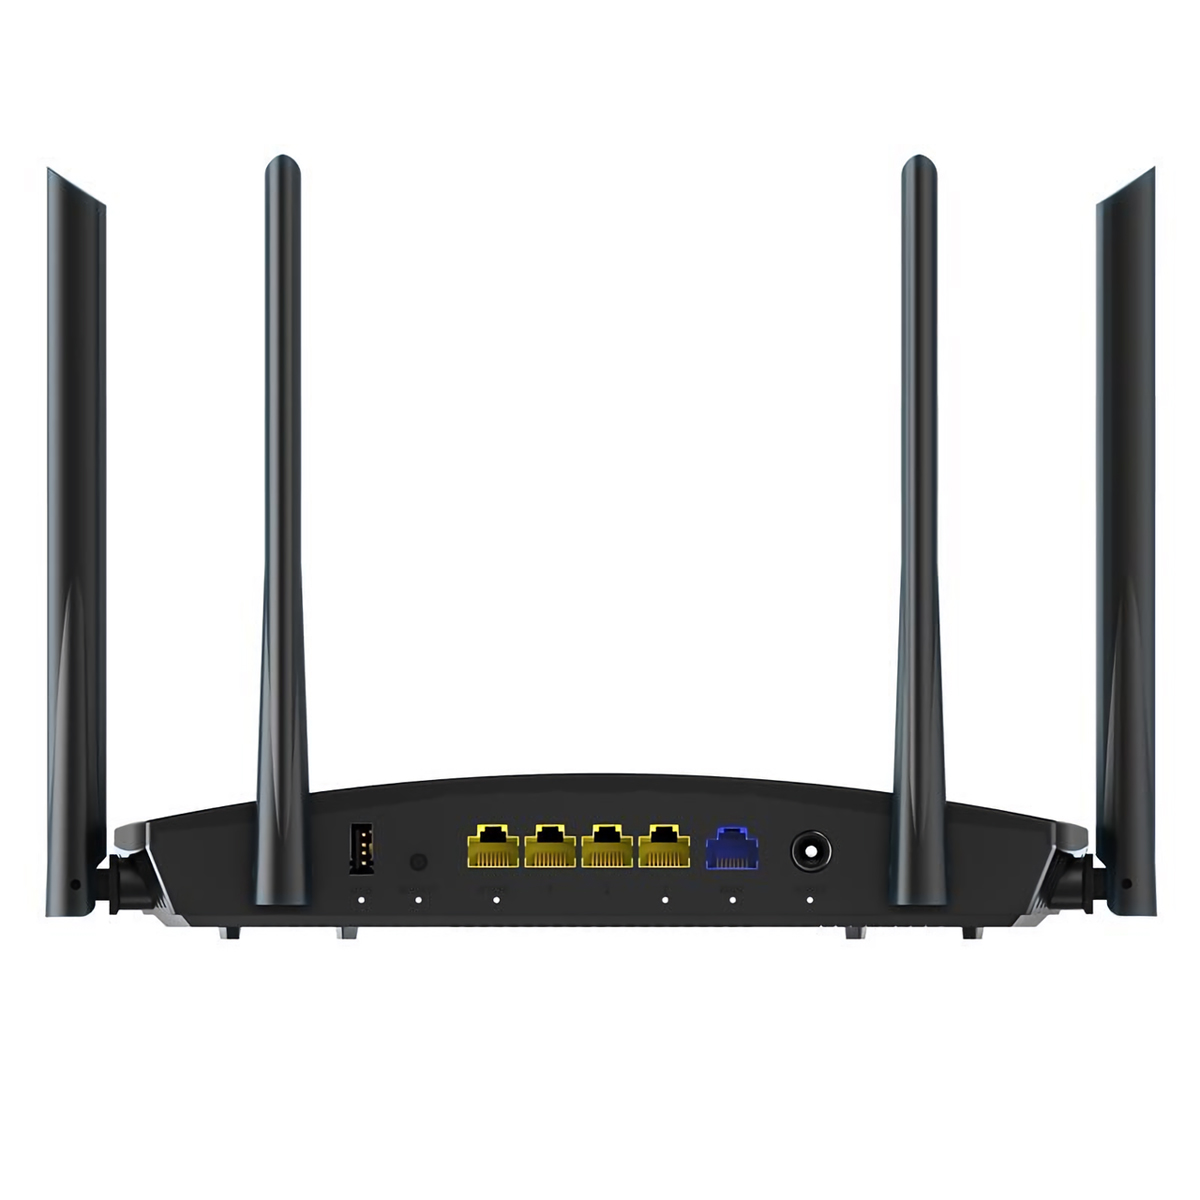 Find Speedefy AC2100 Dual Band High Speed Wireless WiFi Router 2 4GHz 5GHz Up to 35 Devices 2000 sq ft Coverage 4X4 MU MIMO for Streaming Gaming for Sale on Gipsybee.com with cryptocurrencies